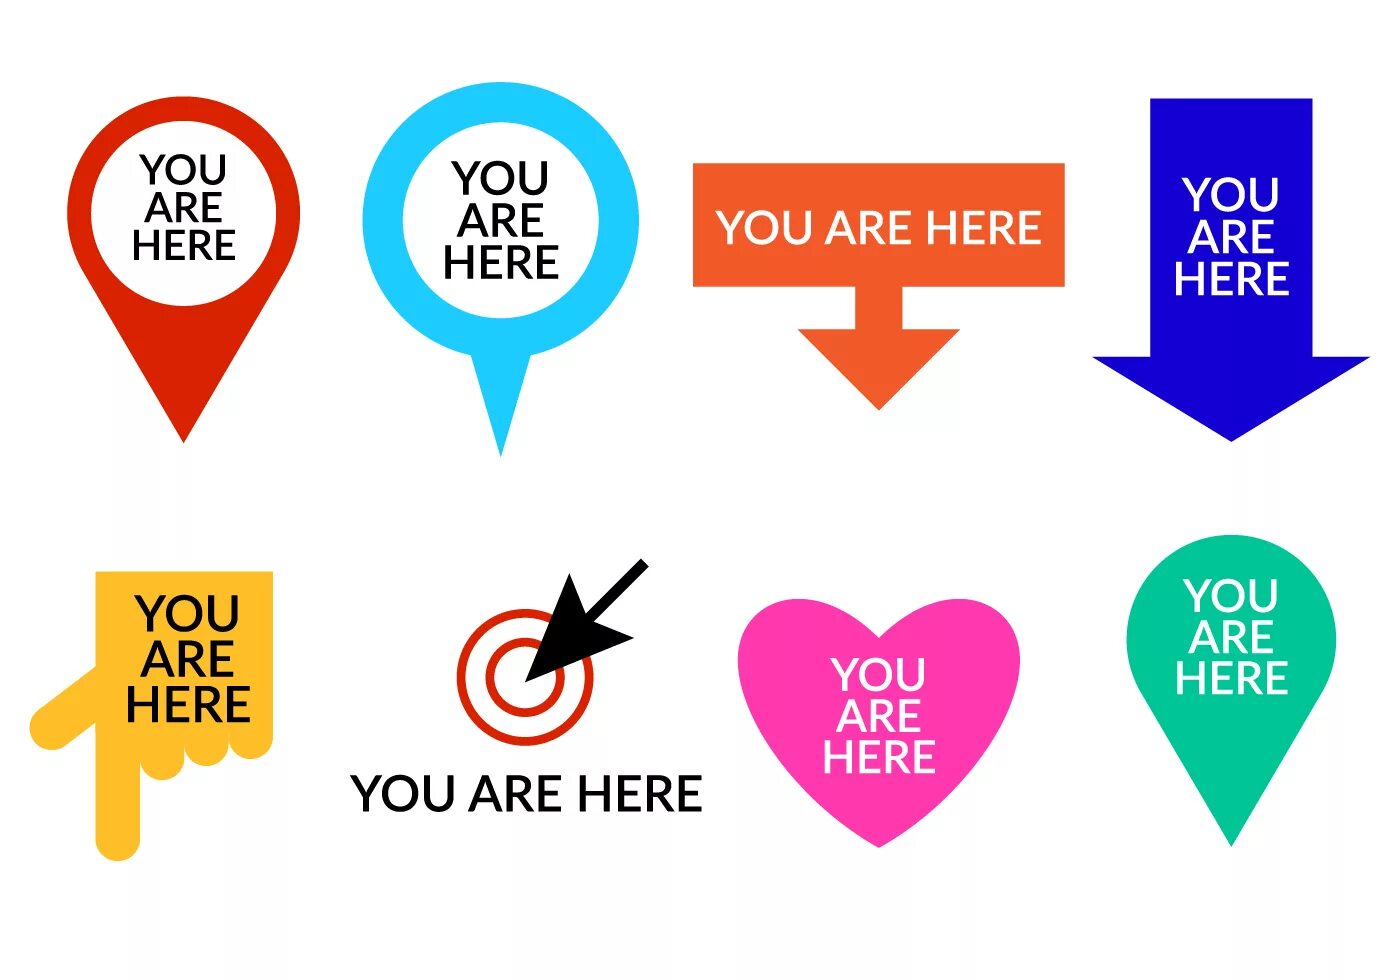 You are here interested. You are here. You are here иконка. We are here значок. You are here sign.